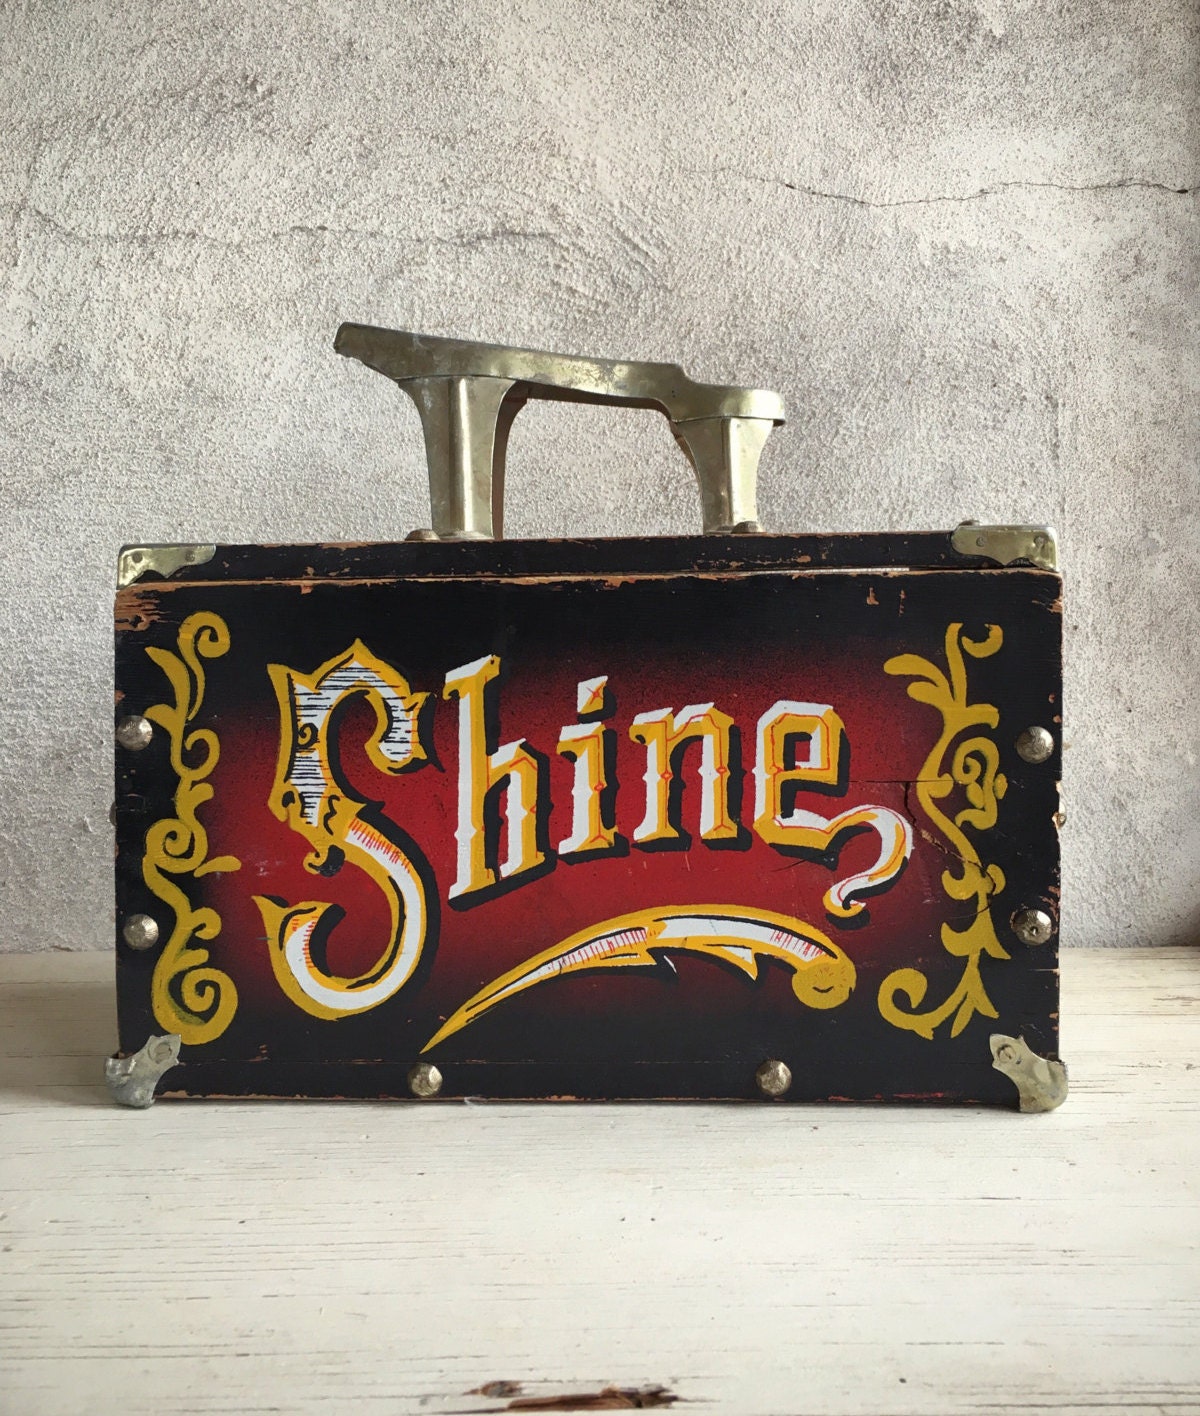 Vintage painted wood shoe shine box with metal shoe plate, 5-cent